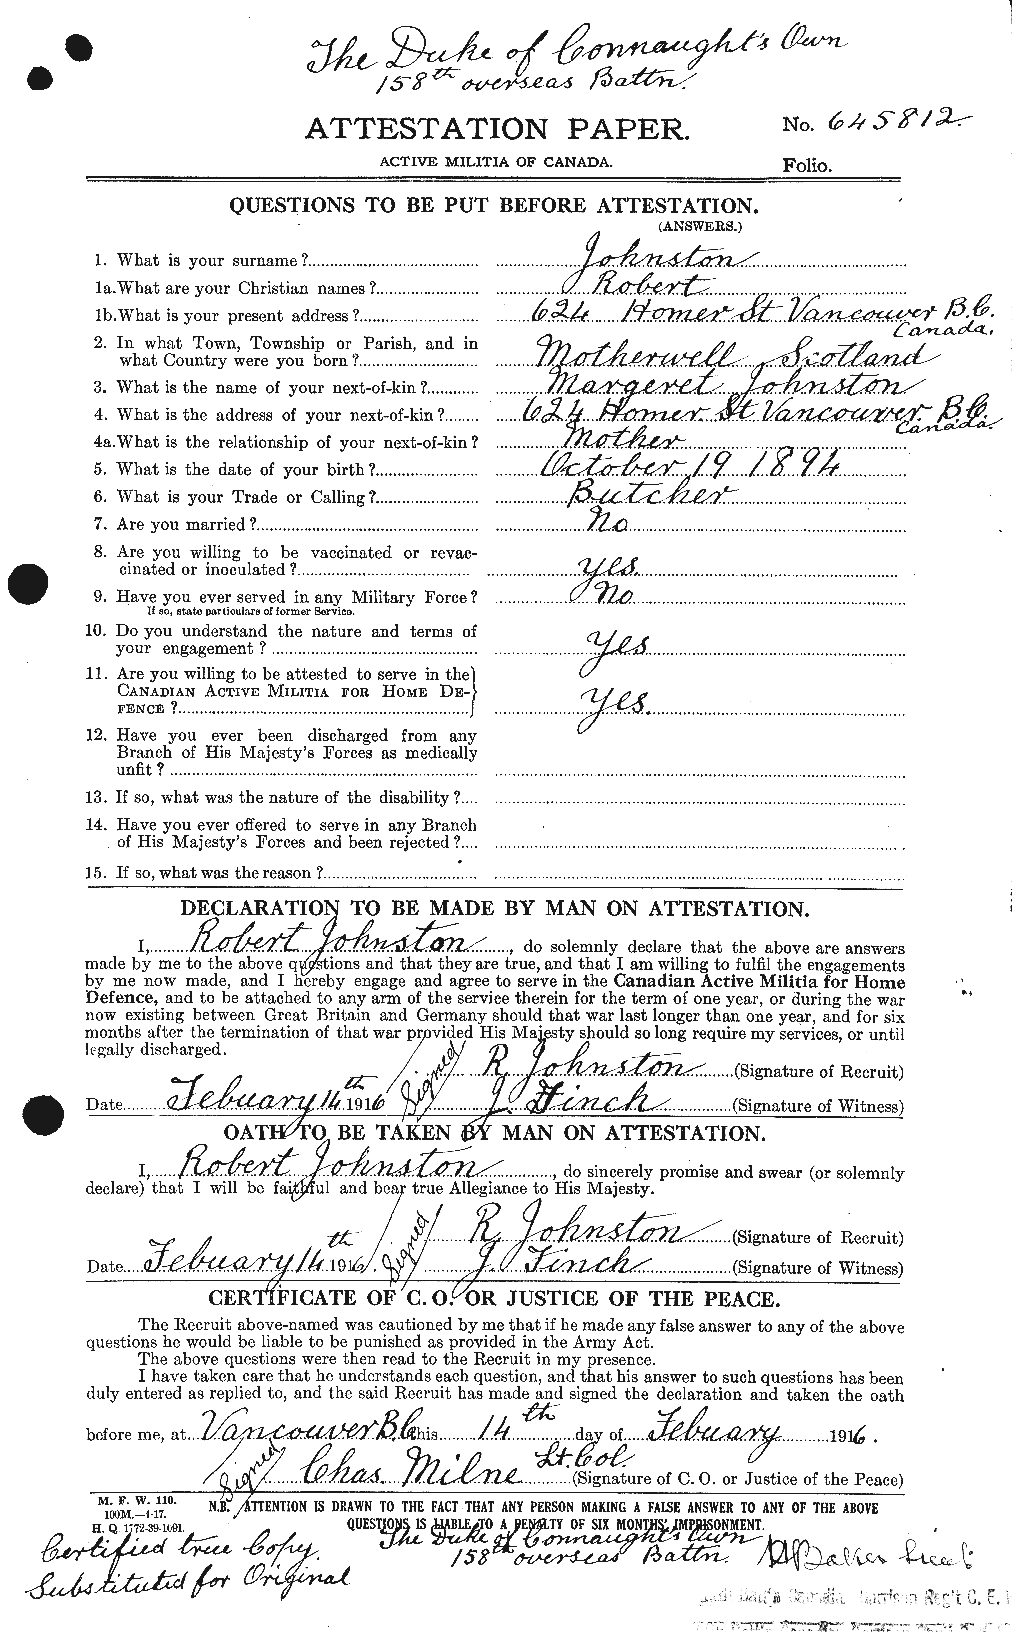 Personnel Records of the First World War - CEF 426989a